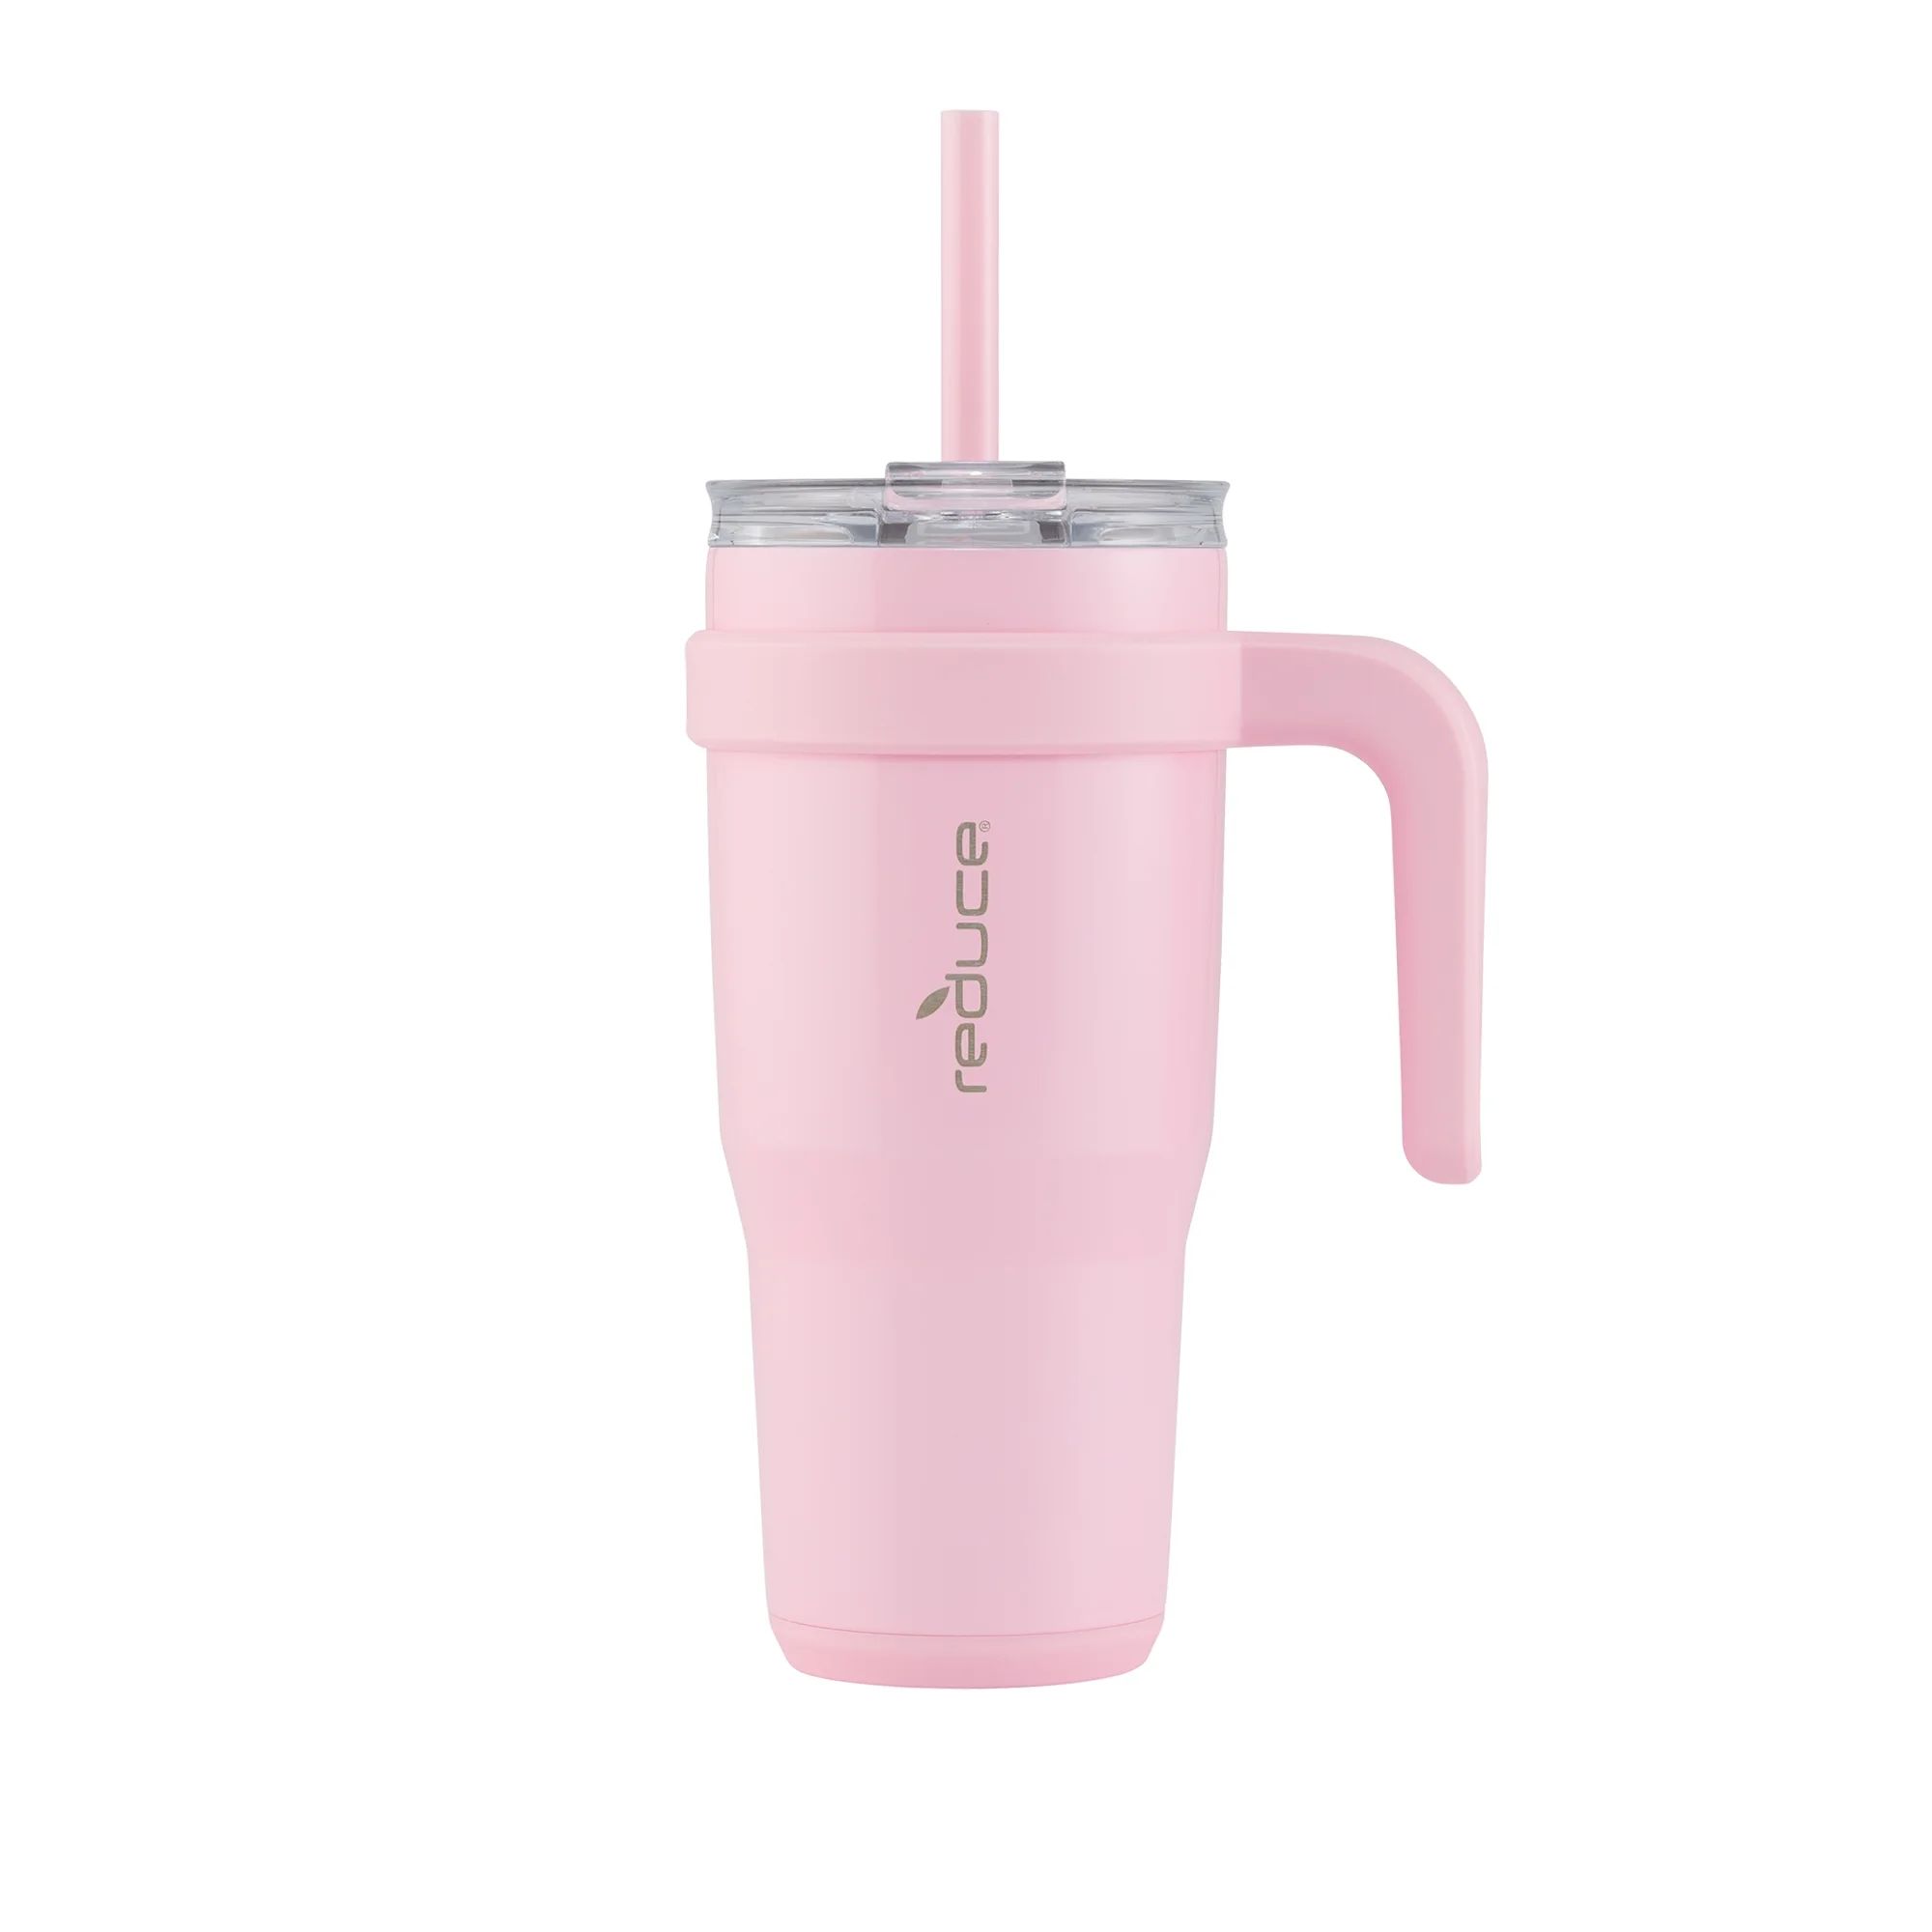 Reduce Cold1 Tumbler with Straw, Lid & Handle - Insulated Stainless Steel with 3-Way Lid - 24oz | Walmart (US)